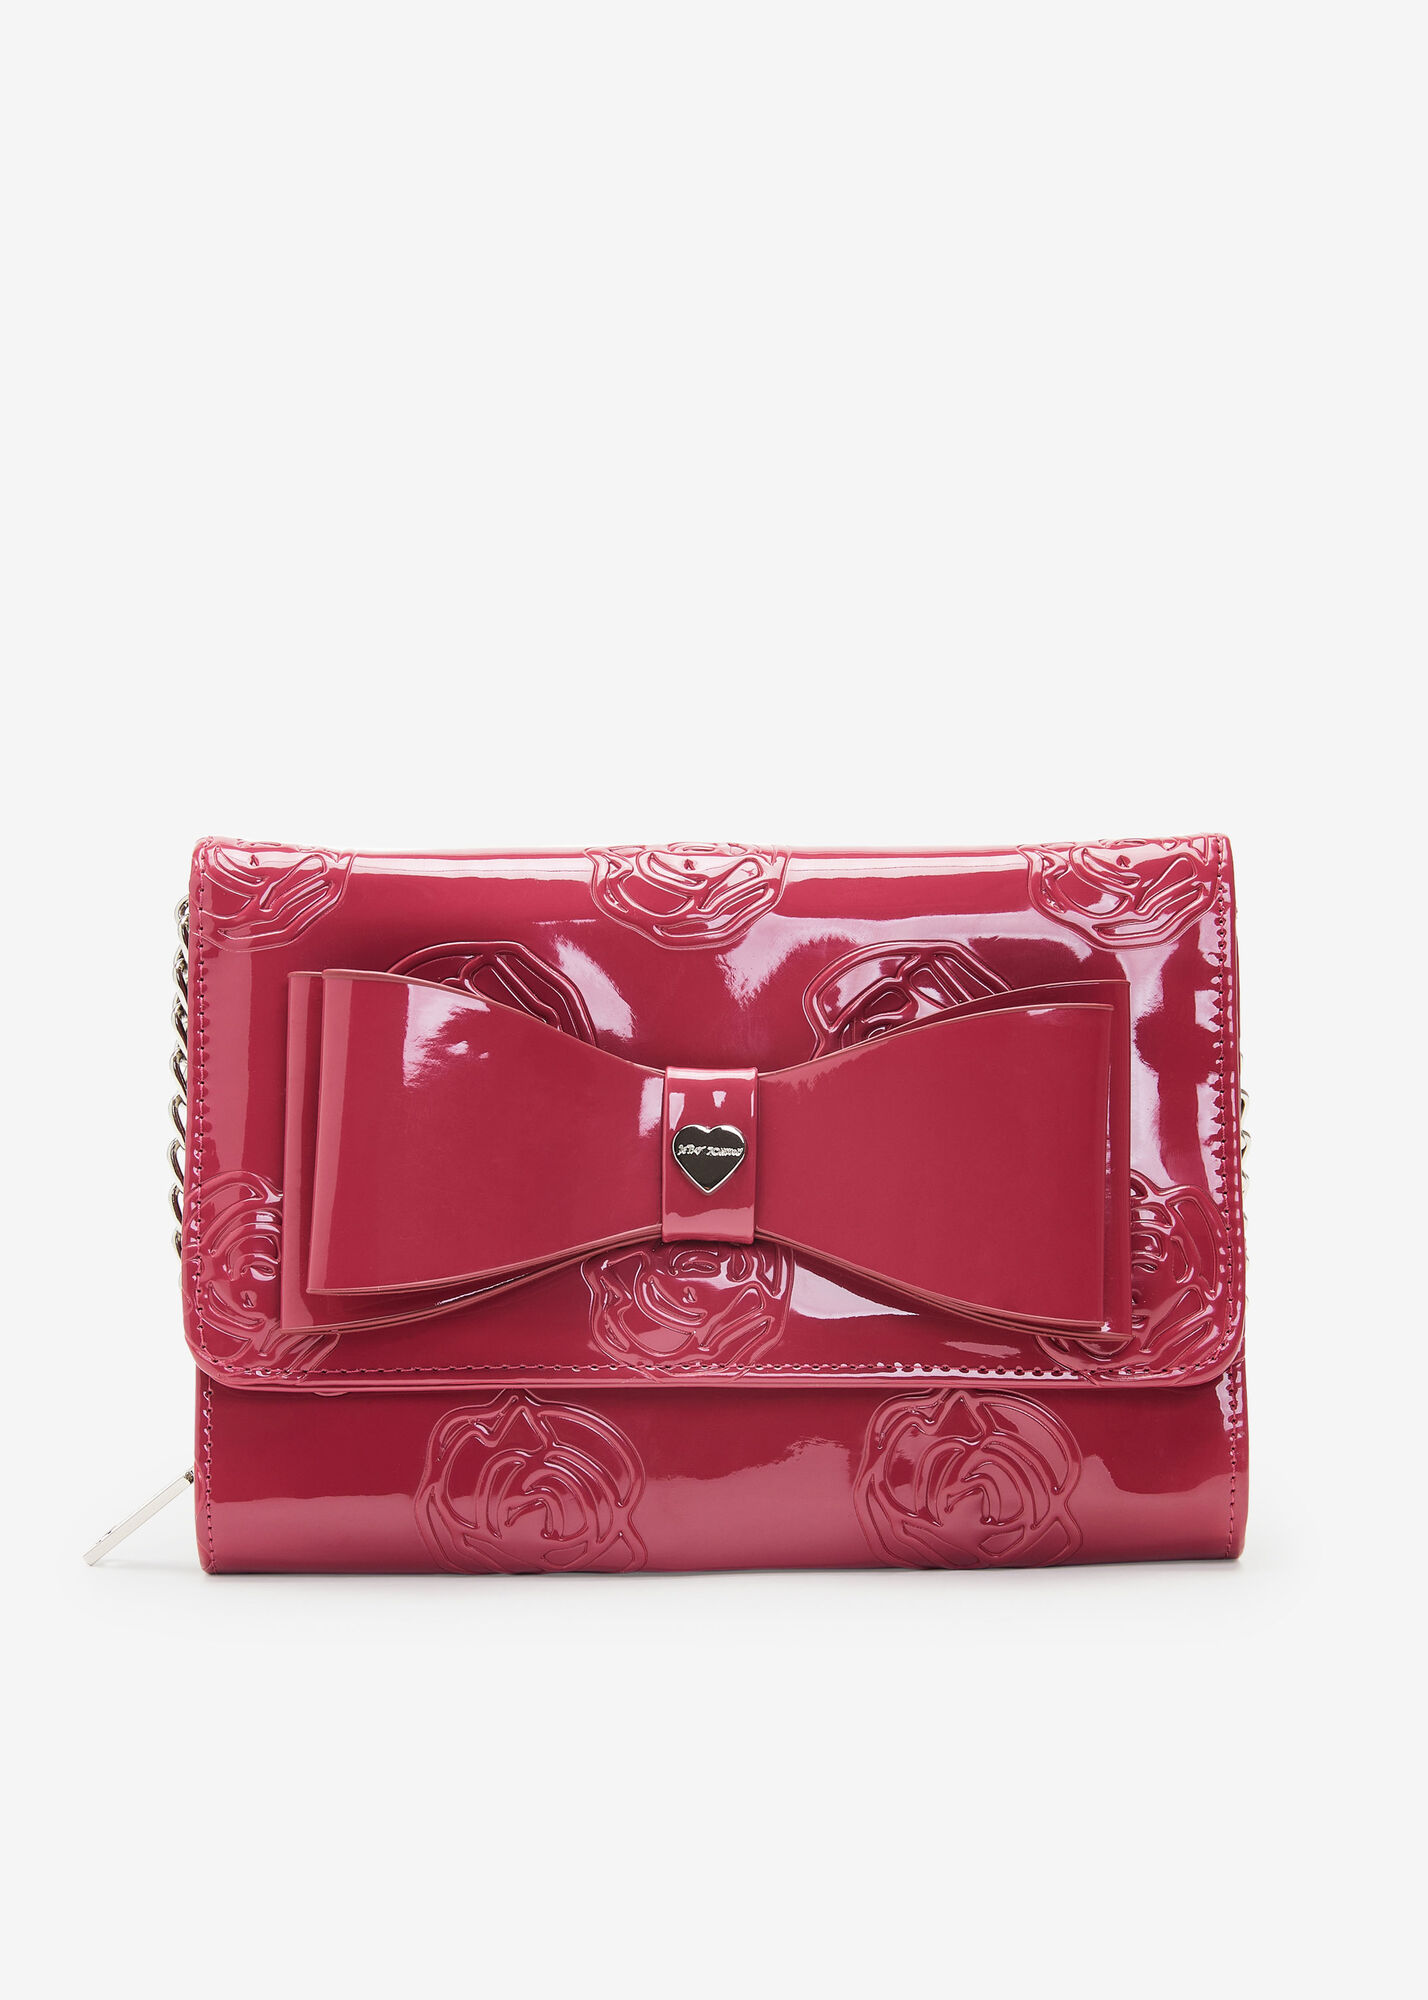 Valentino Pink Patent Leather Bow Shoulder Bag